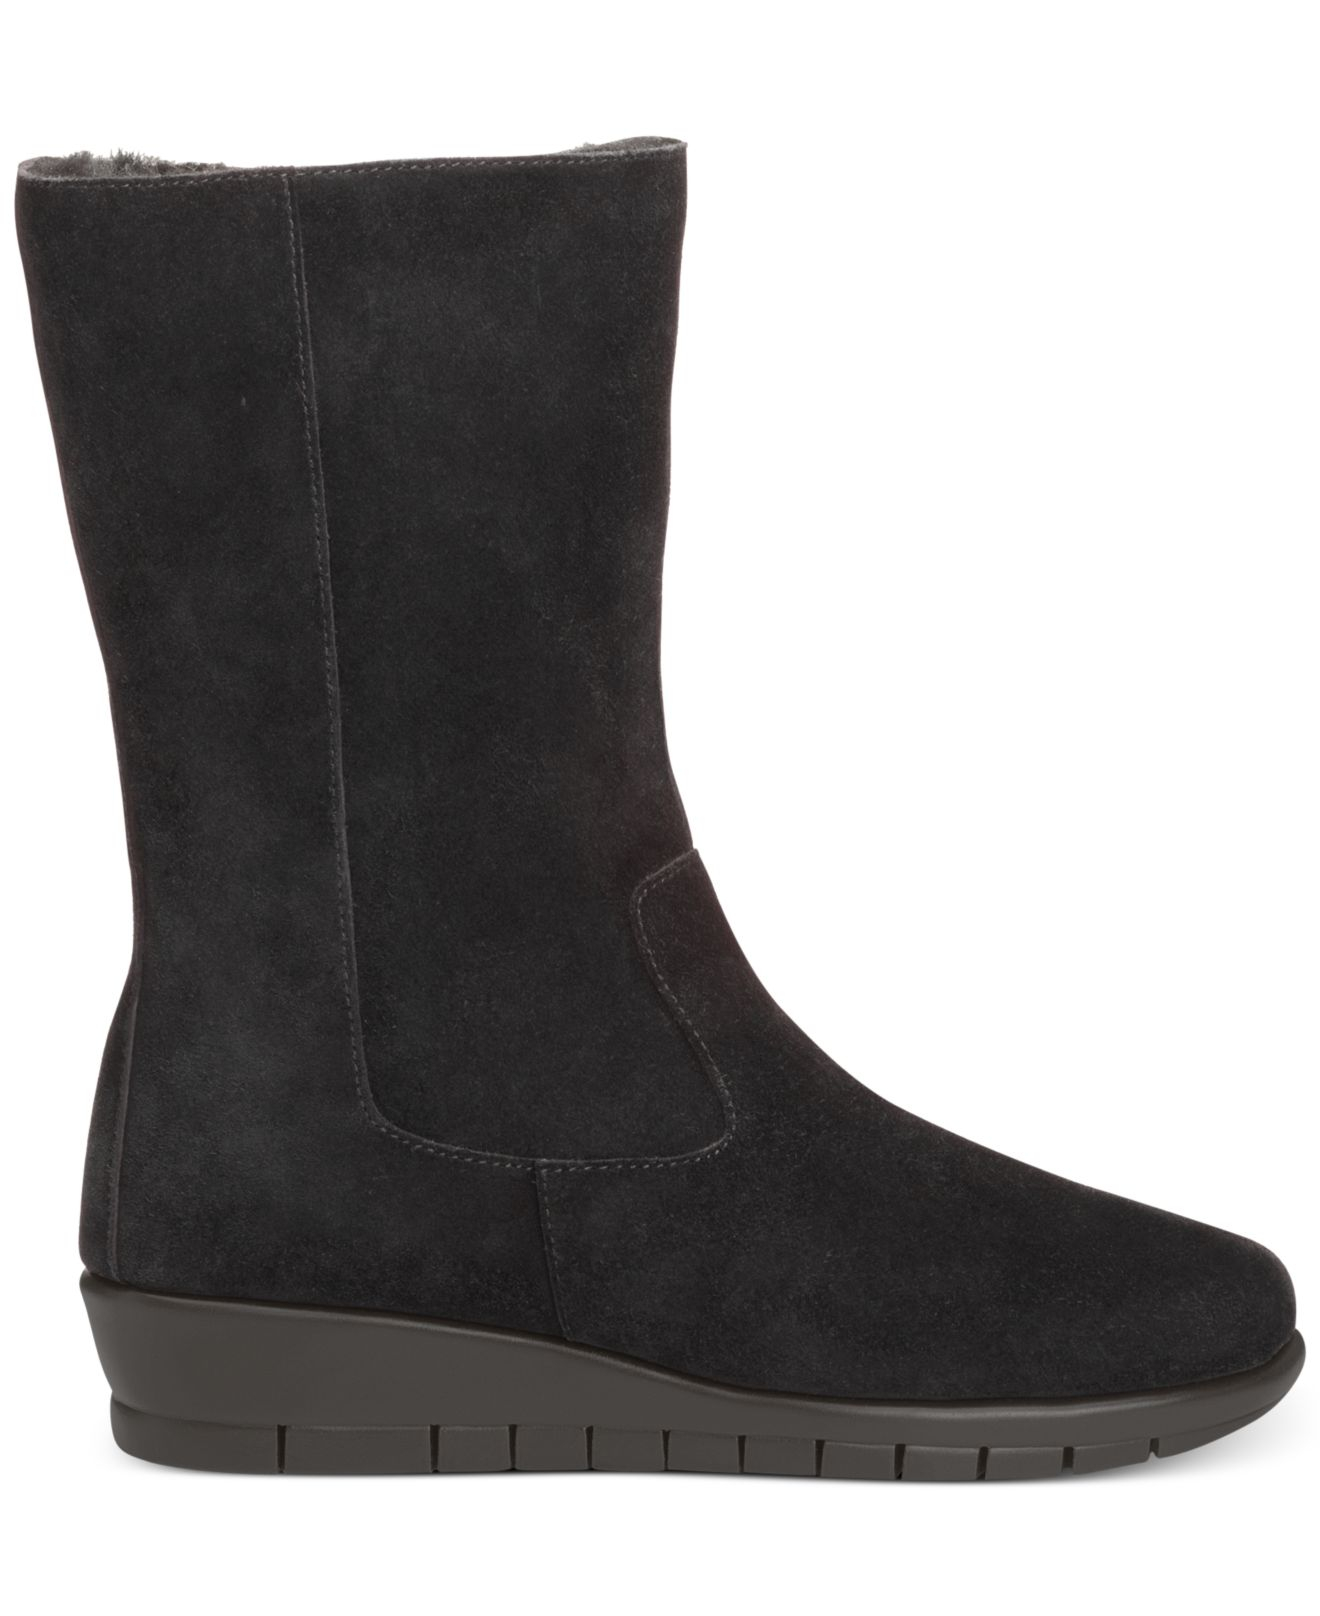 Lyst - Aerosoles Plantation Mid-shaft Cold Weather Boots in Black